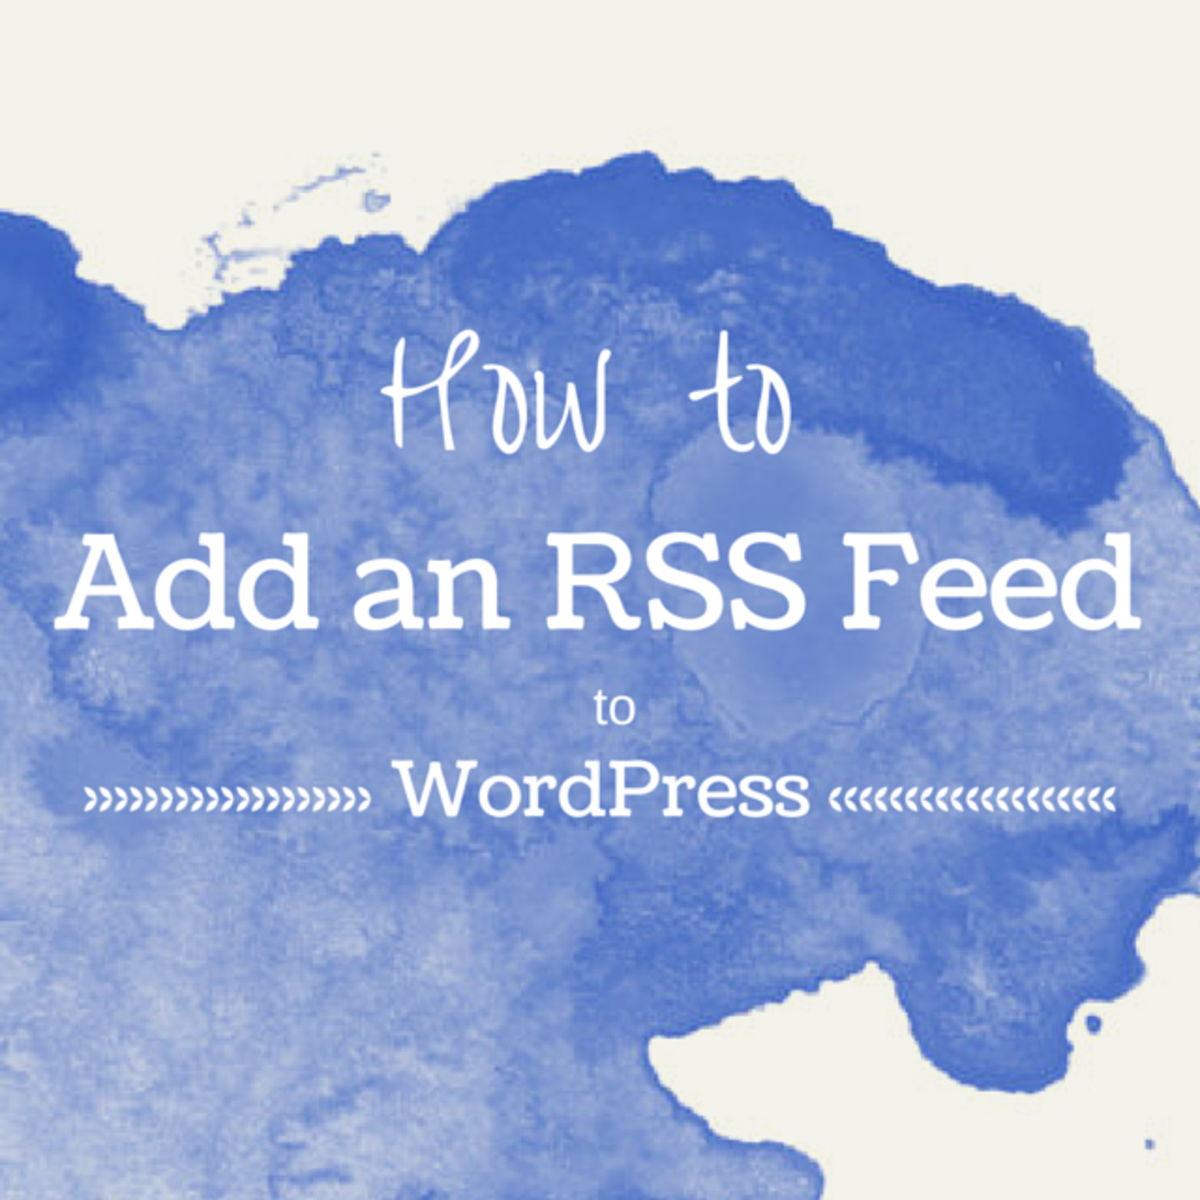 How to Add an RSS Feed to a WordPress Blog